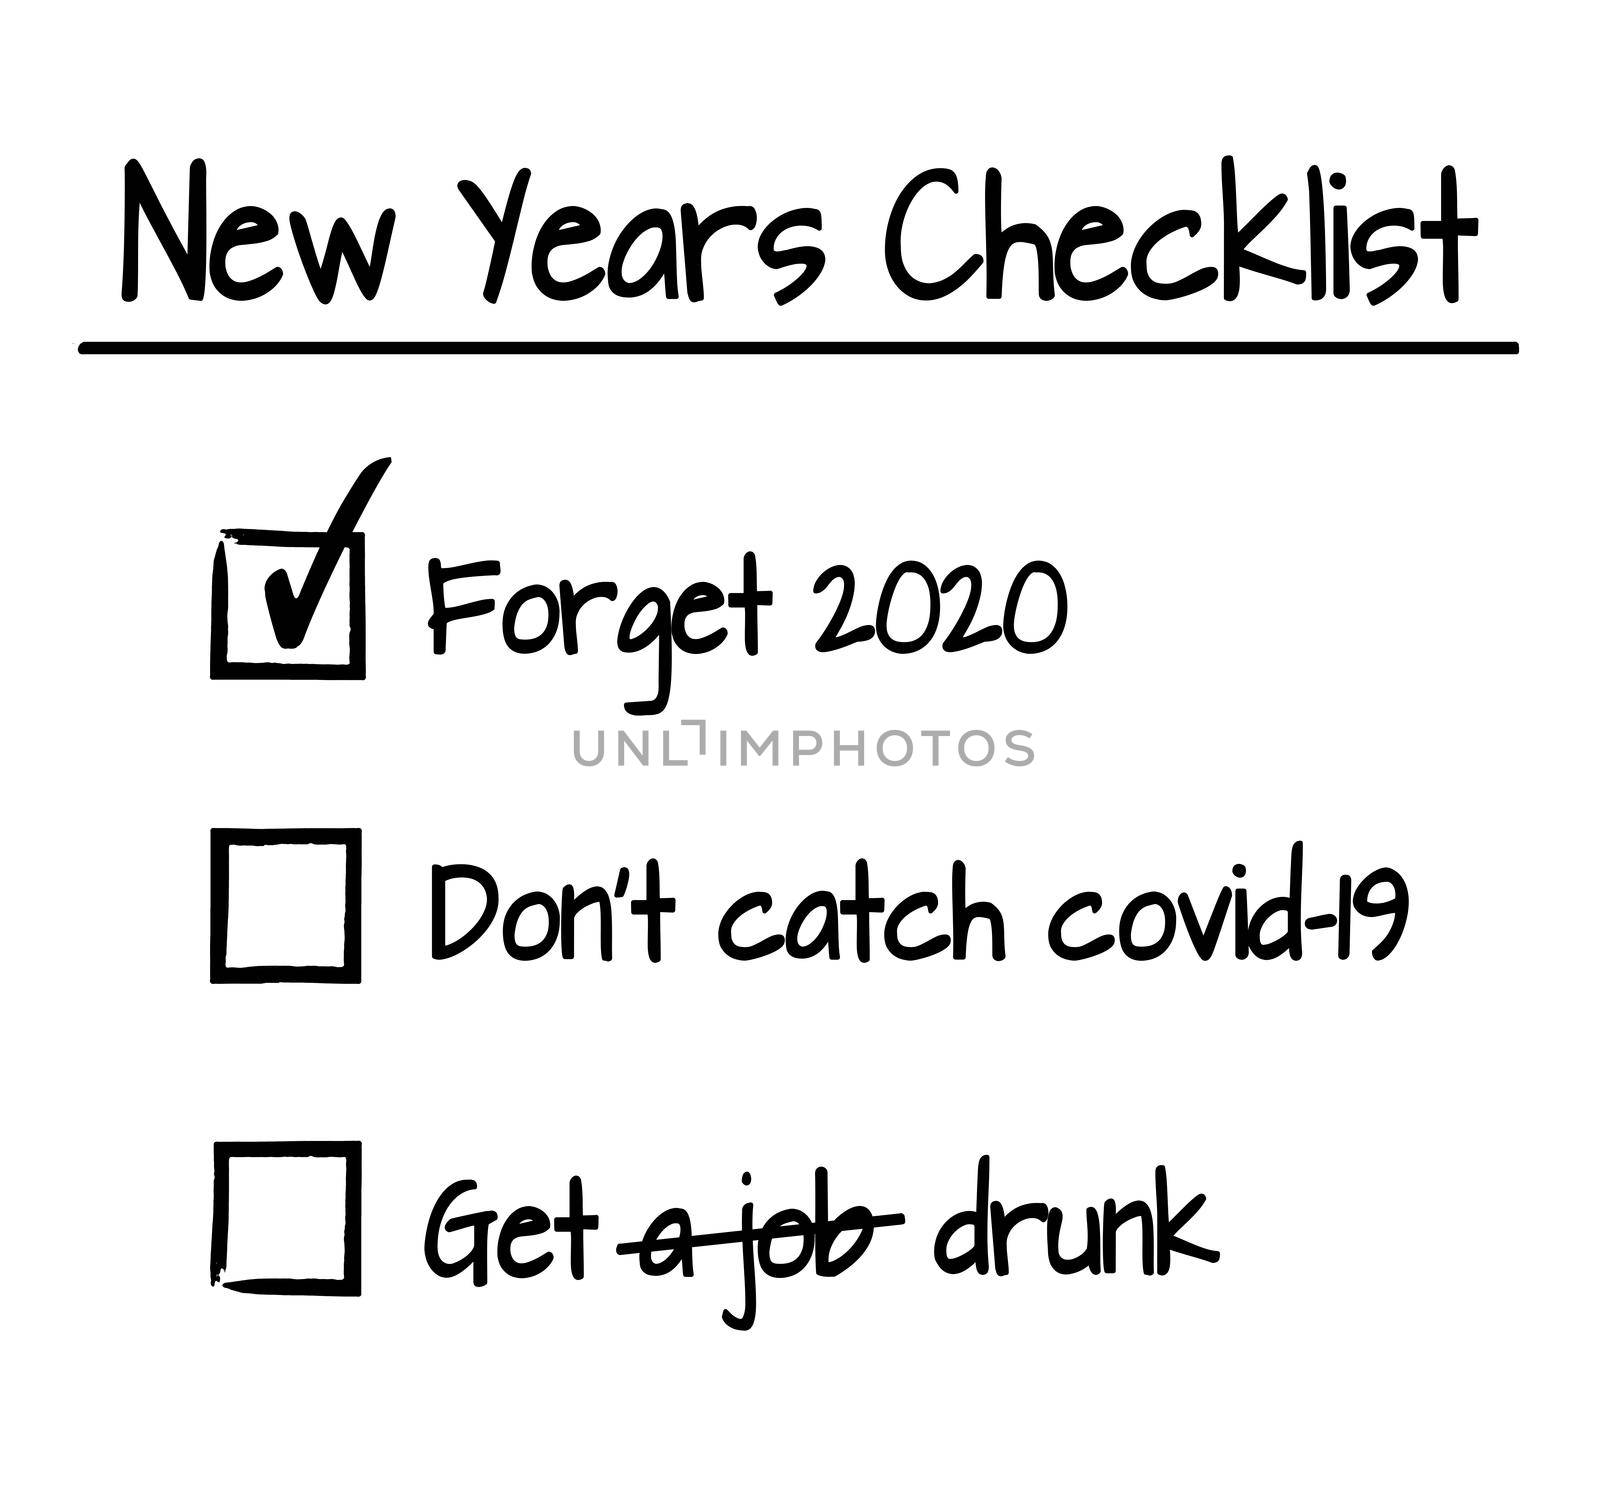 New years checklist by Bigalbaloo